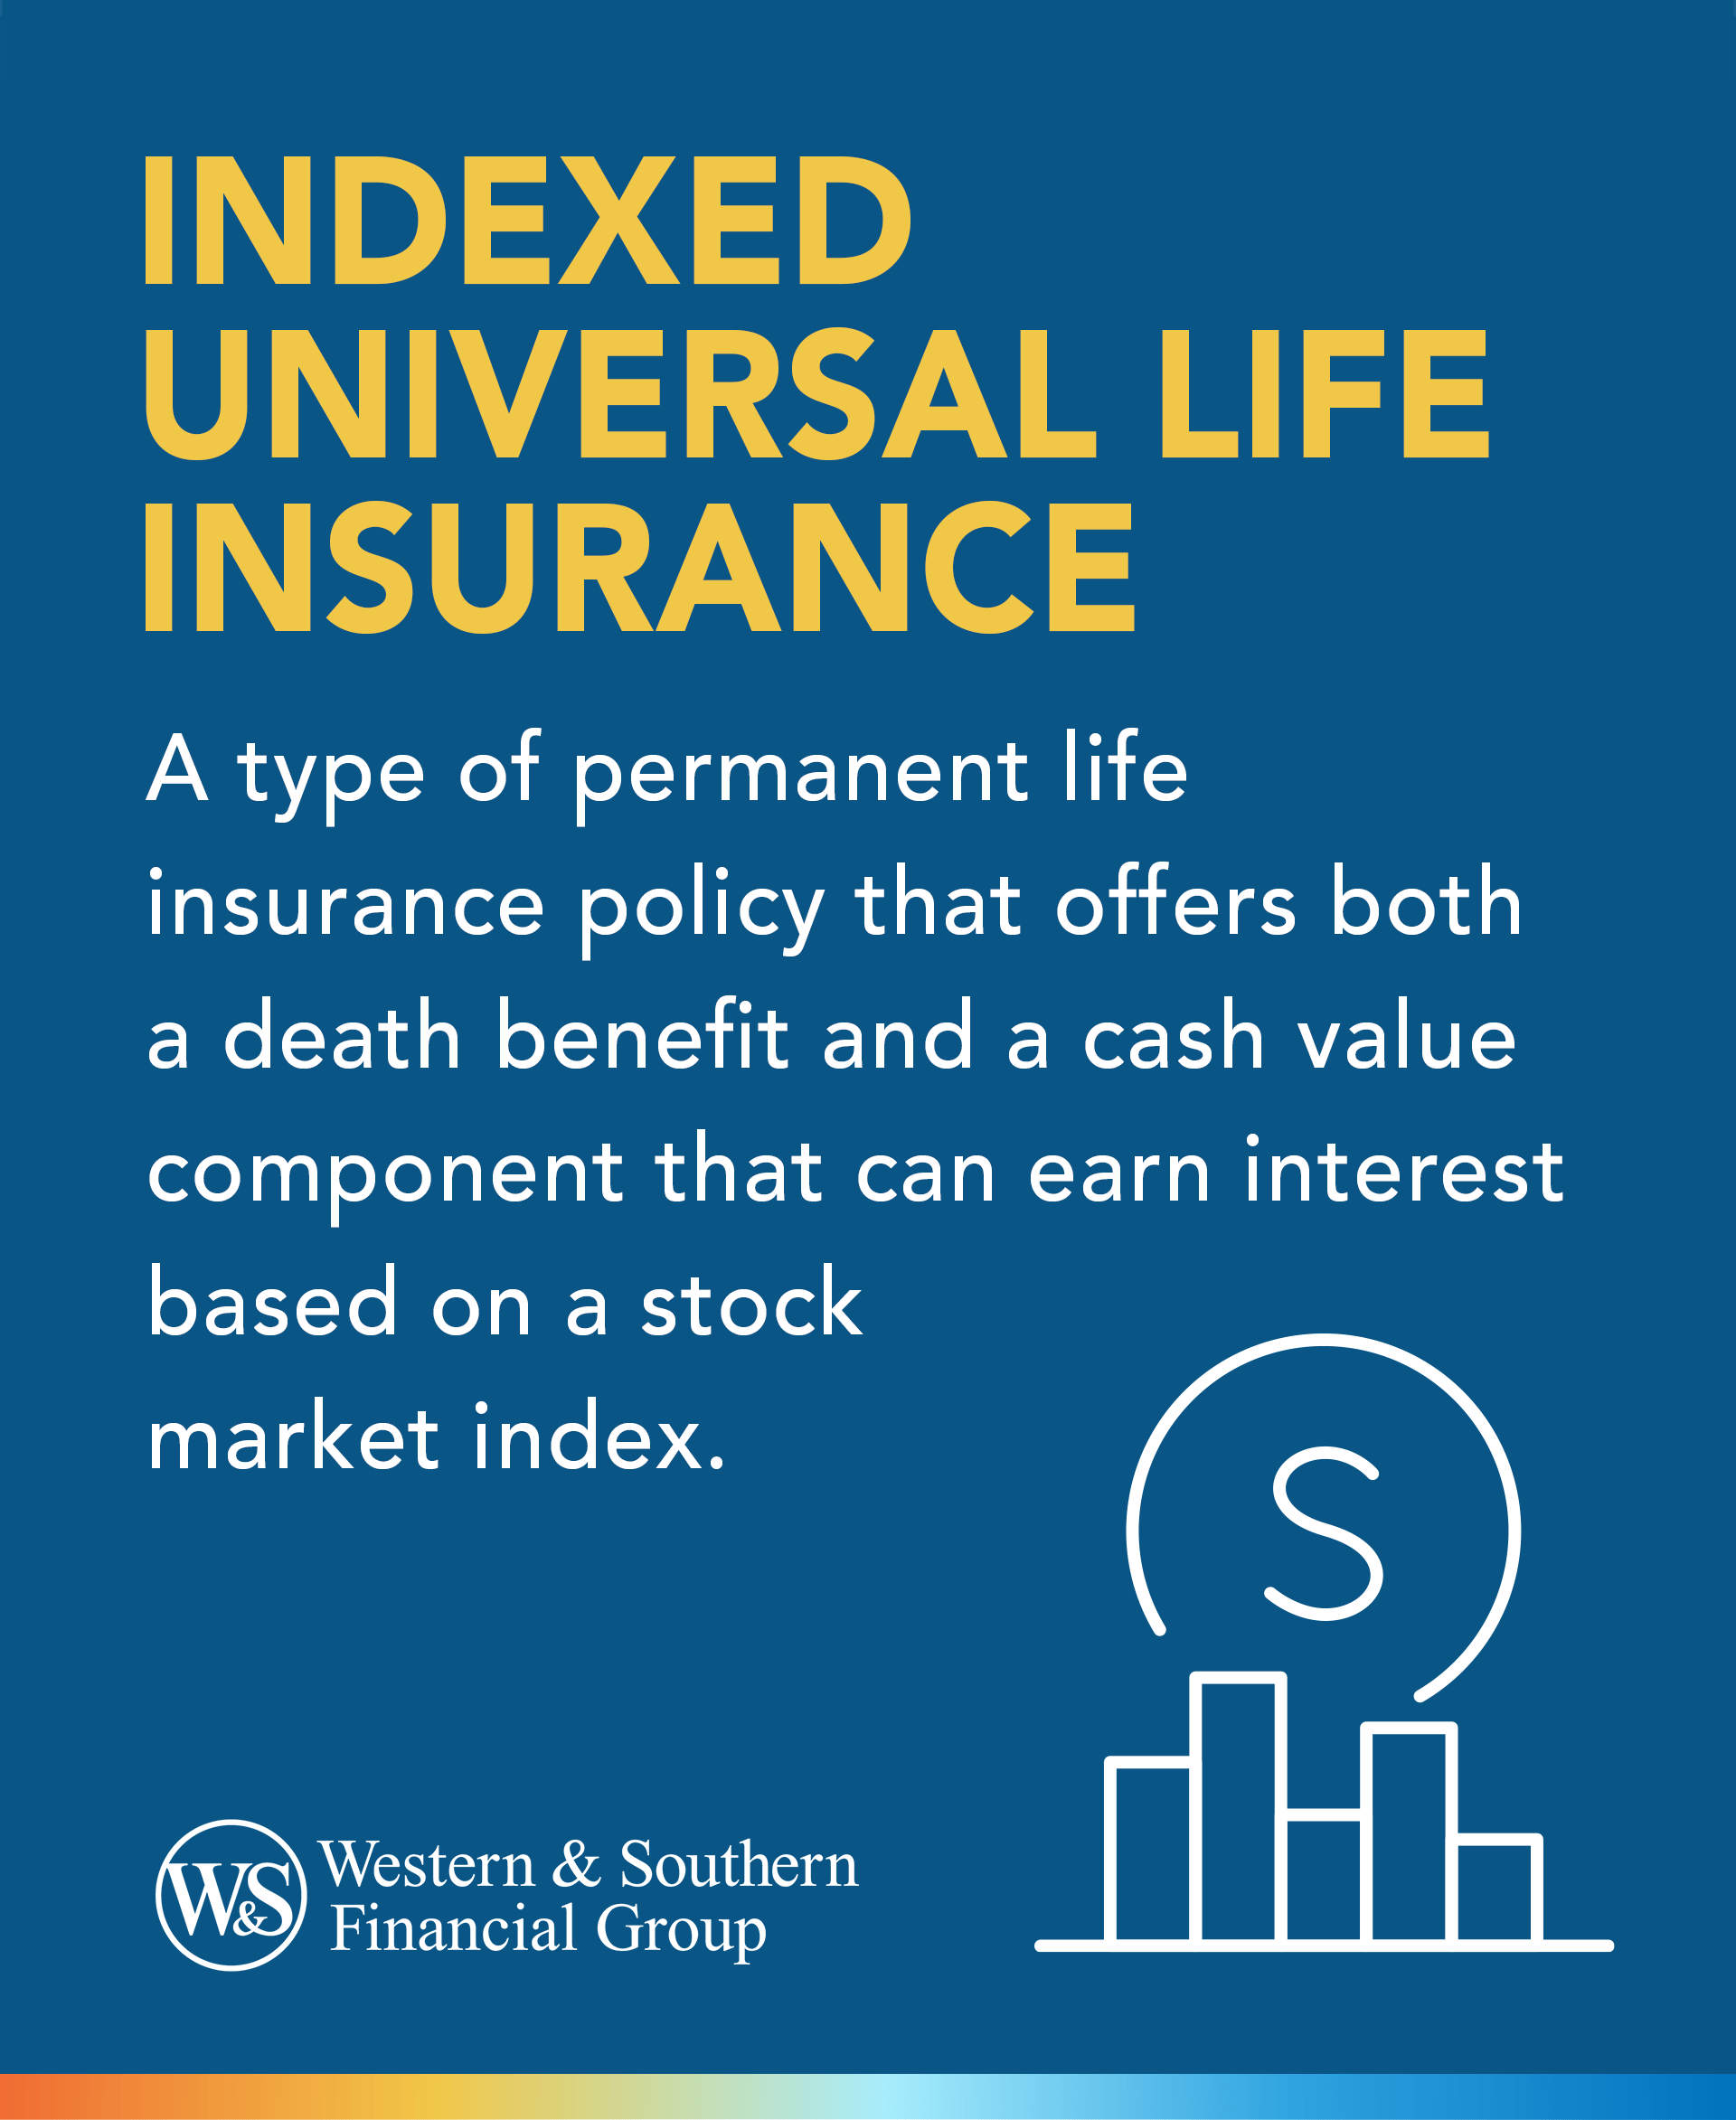 Is there ever a bad time to buy life insurance?